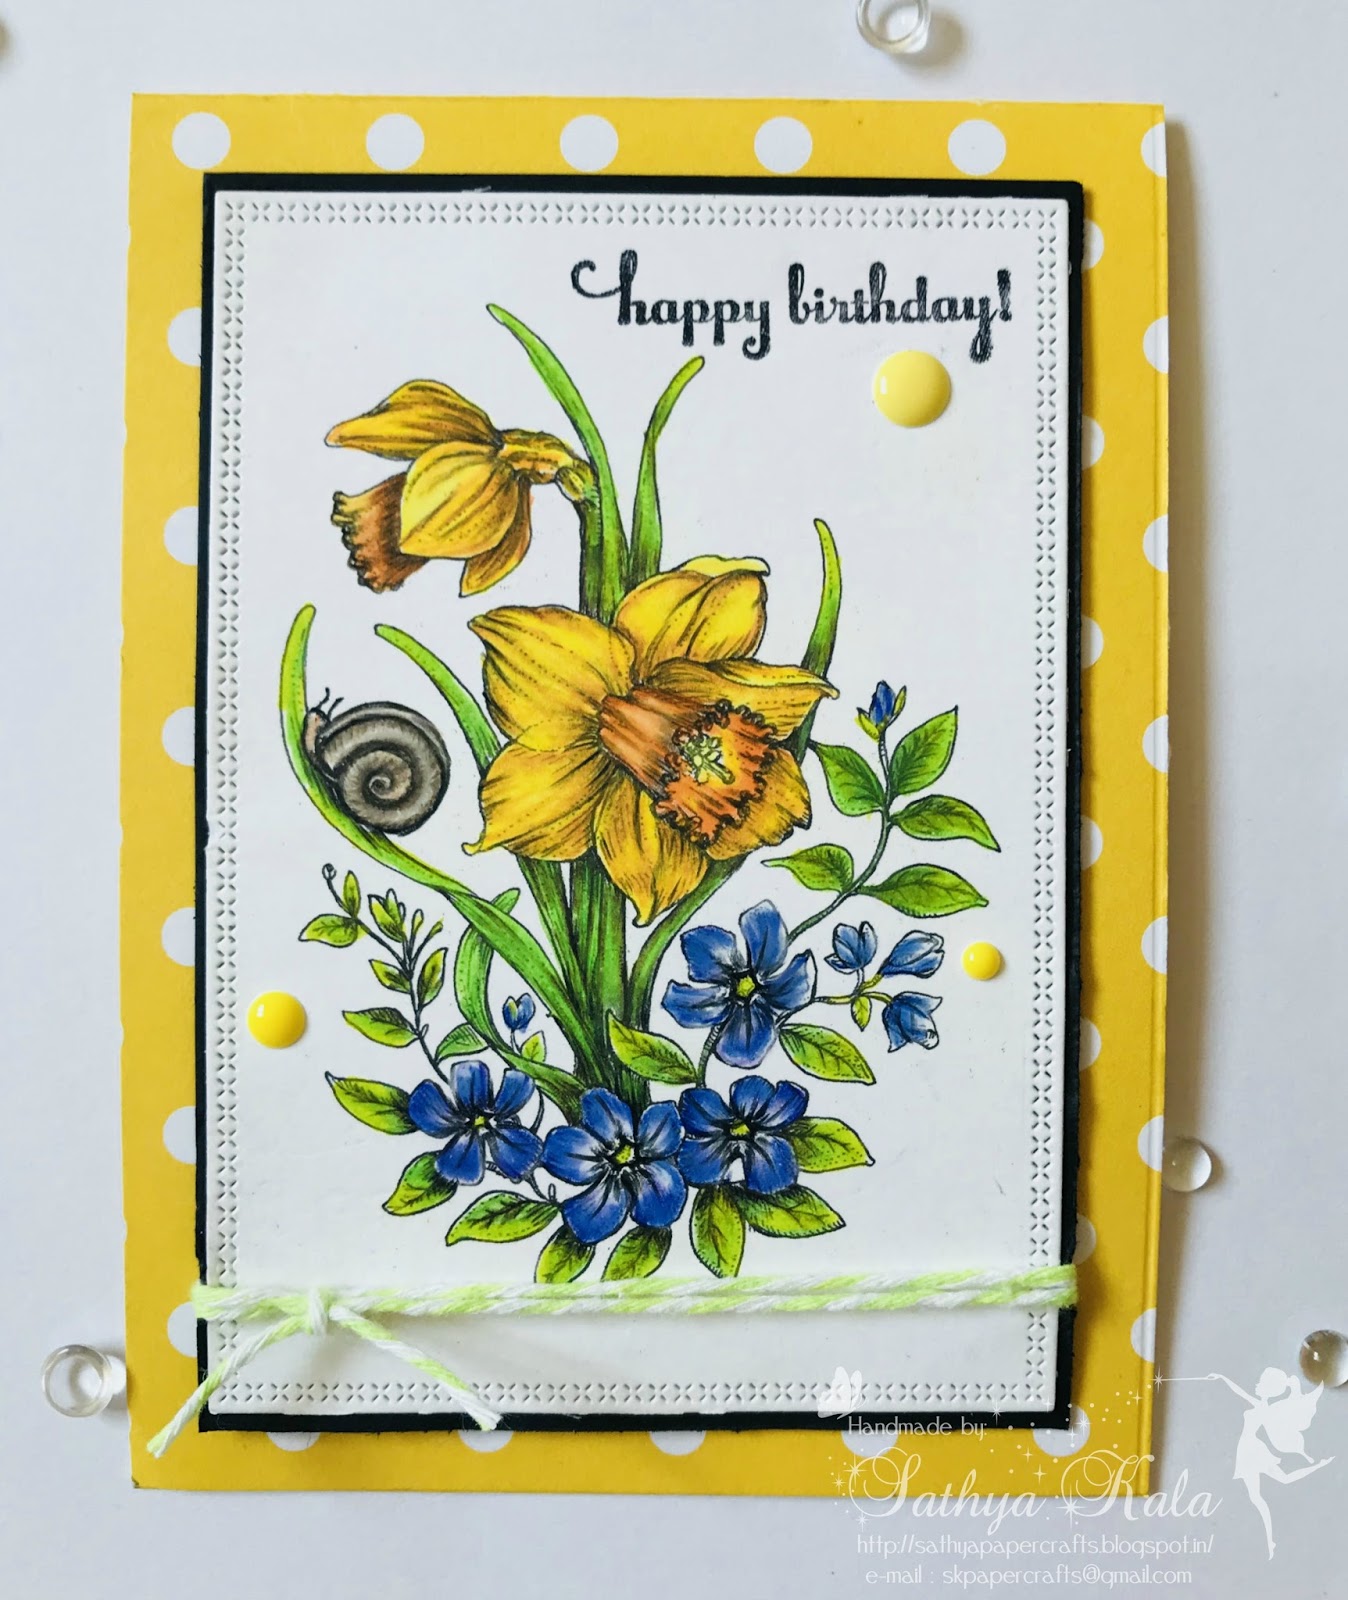 paperie-expressions-happy-birthday-card